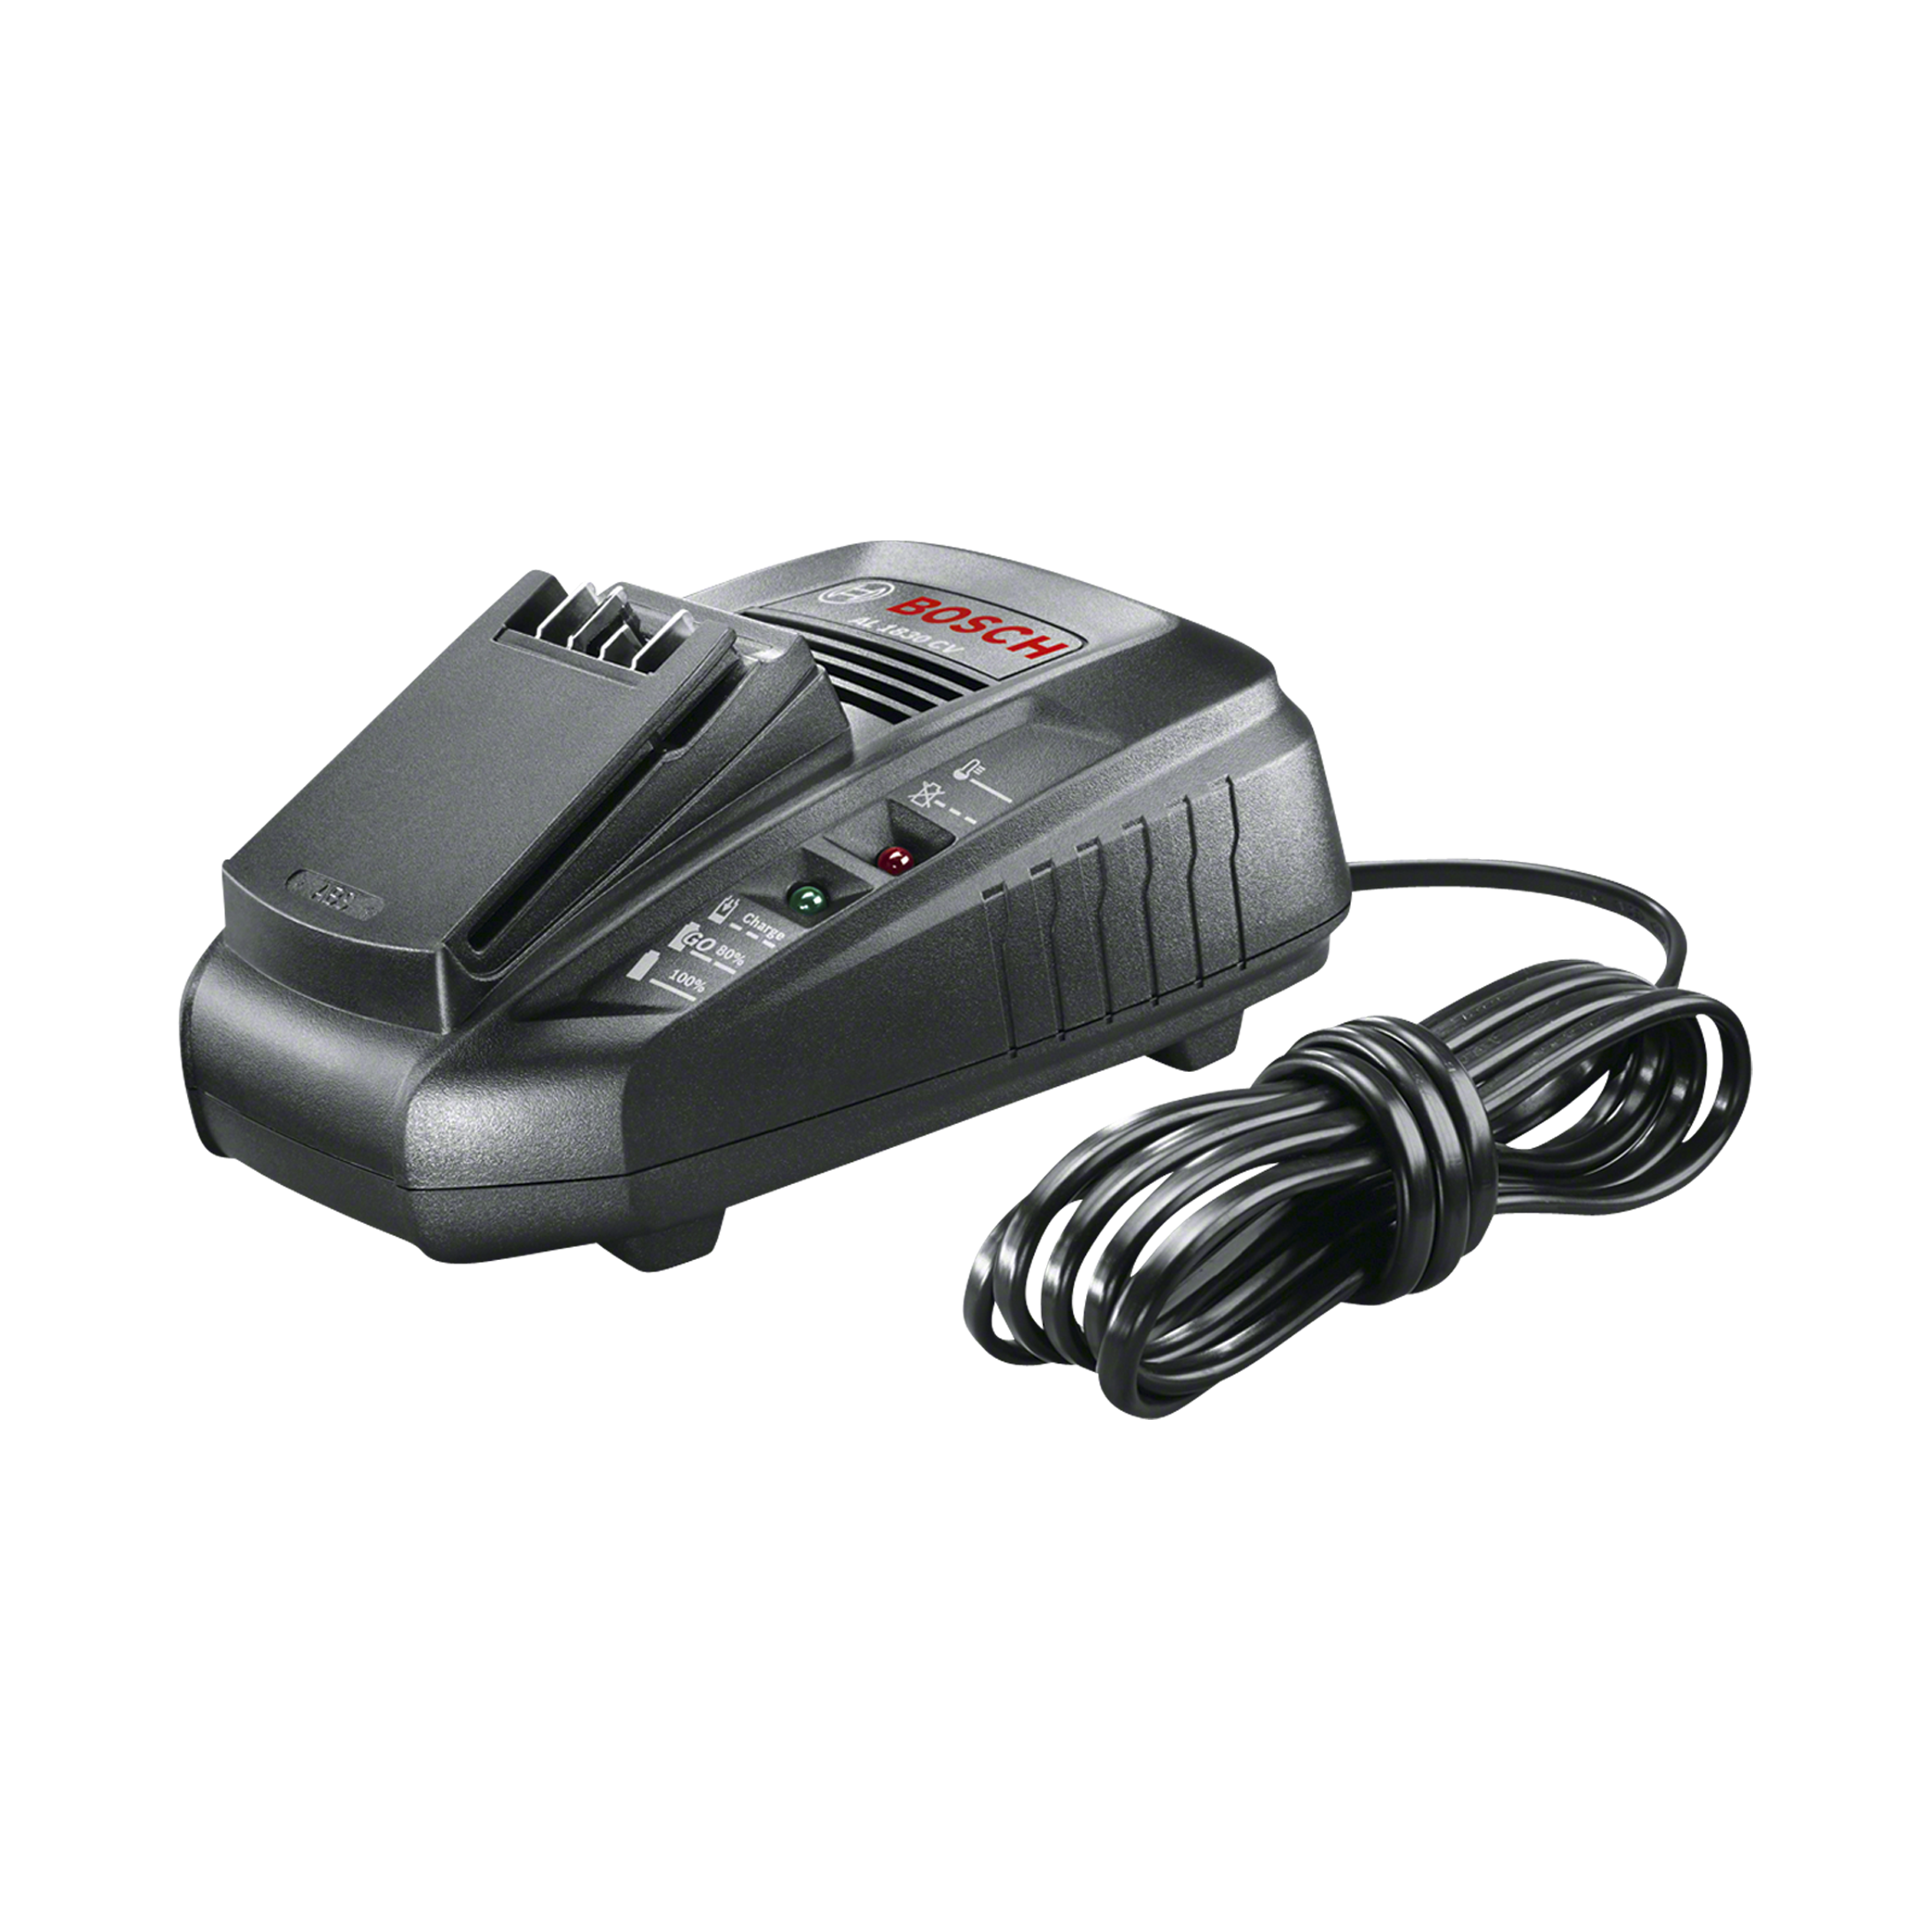 Bosch AL 1880 CV Quick Charger - Buy now!